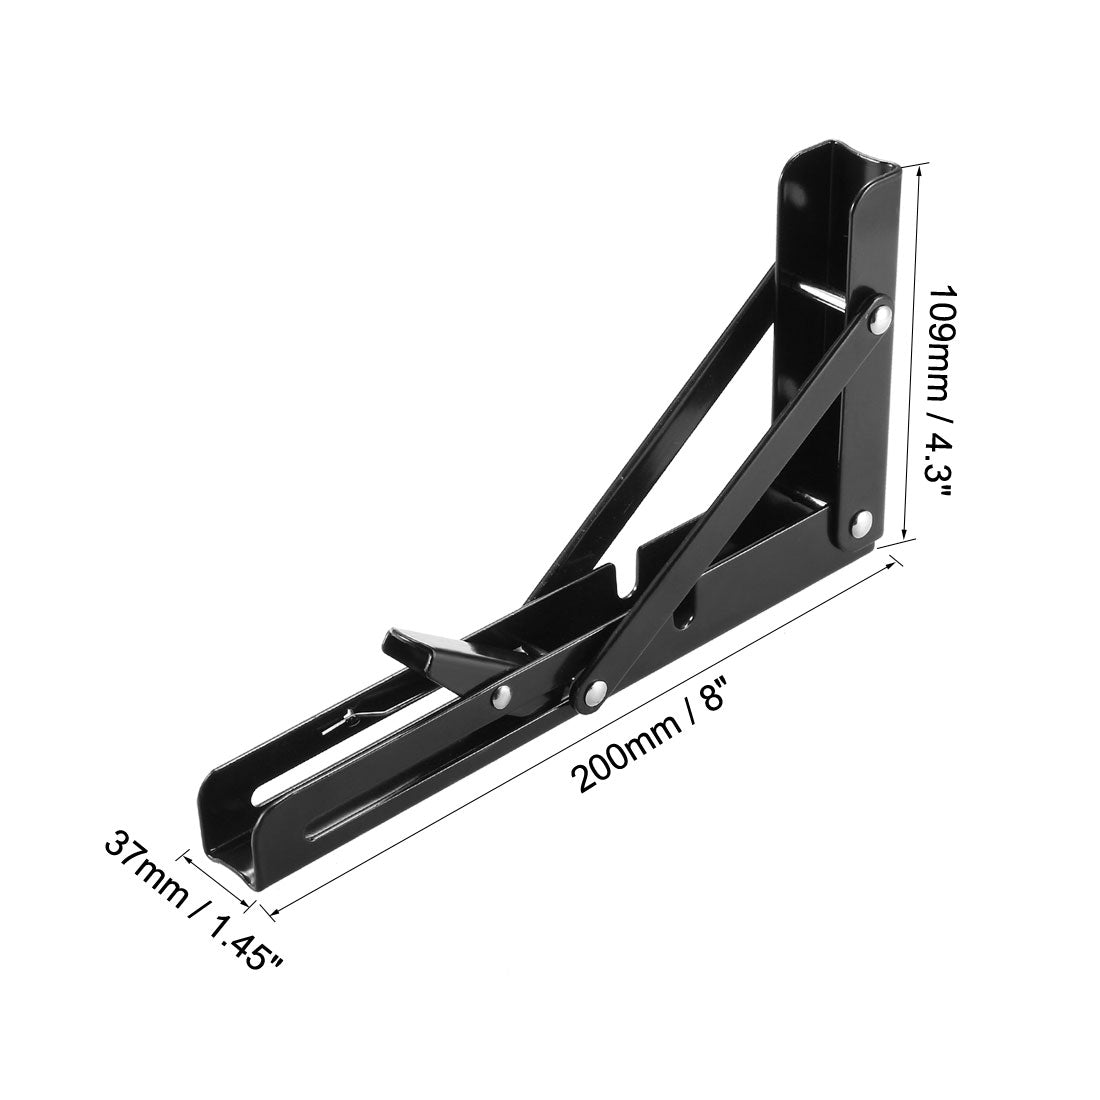 uxcell Uxcell Folding Bracket 8 Inch 200mm for Shelves Table Desk Wall Mounted Support Collapsible Long Release Arm Space Saving Carbon Steel 1pcs